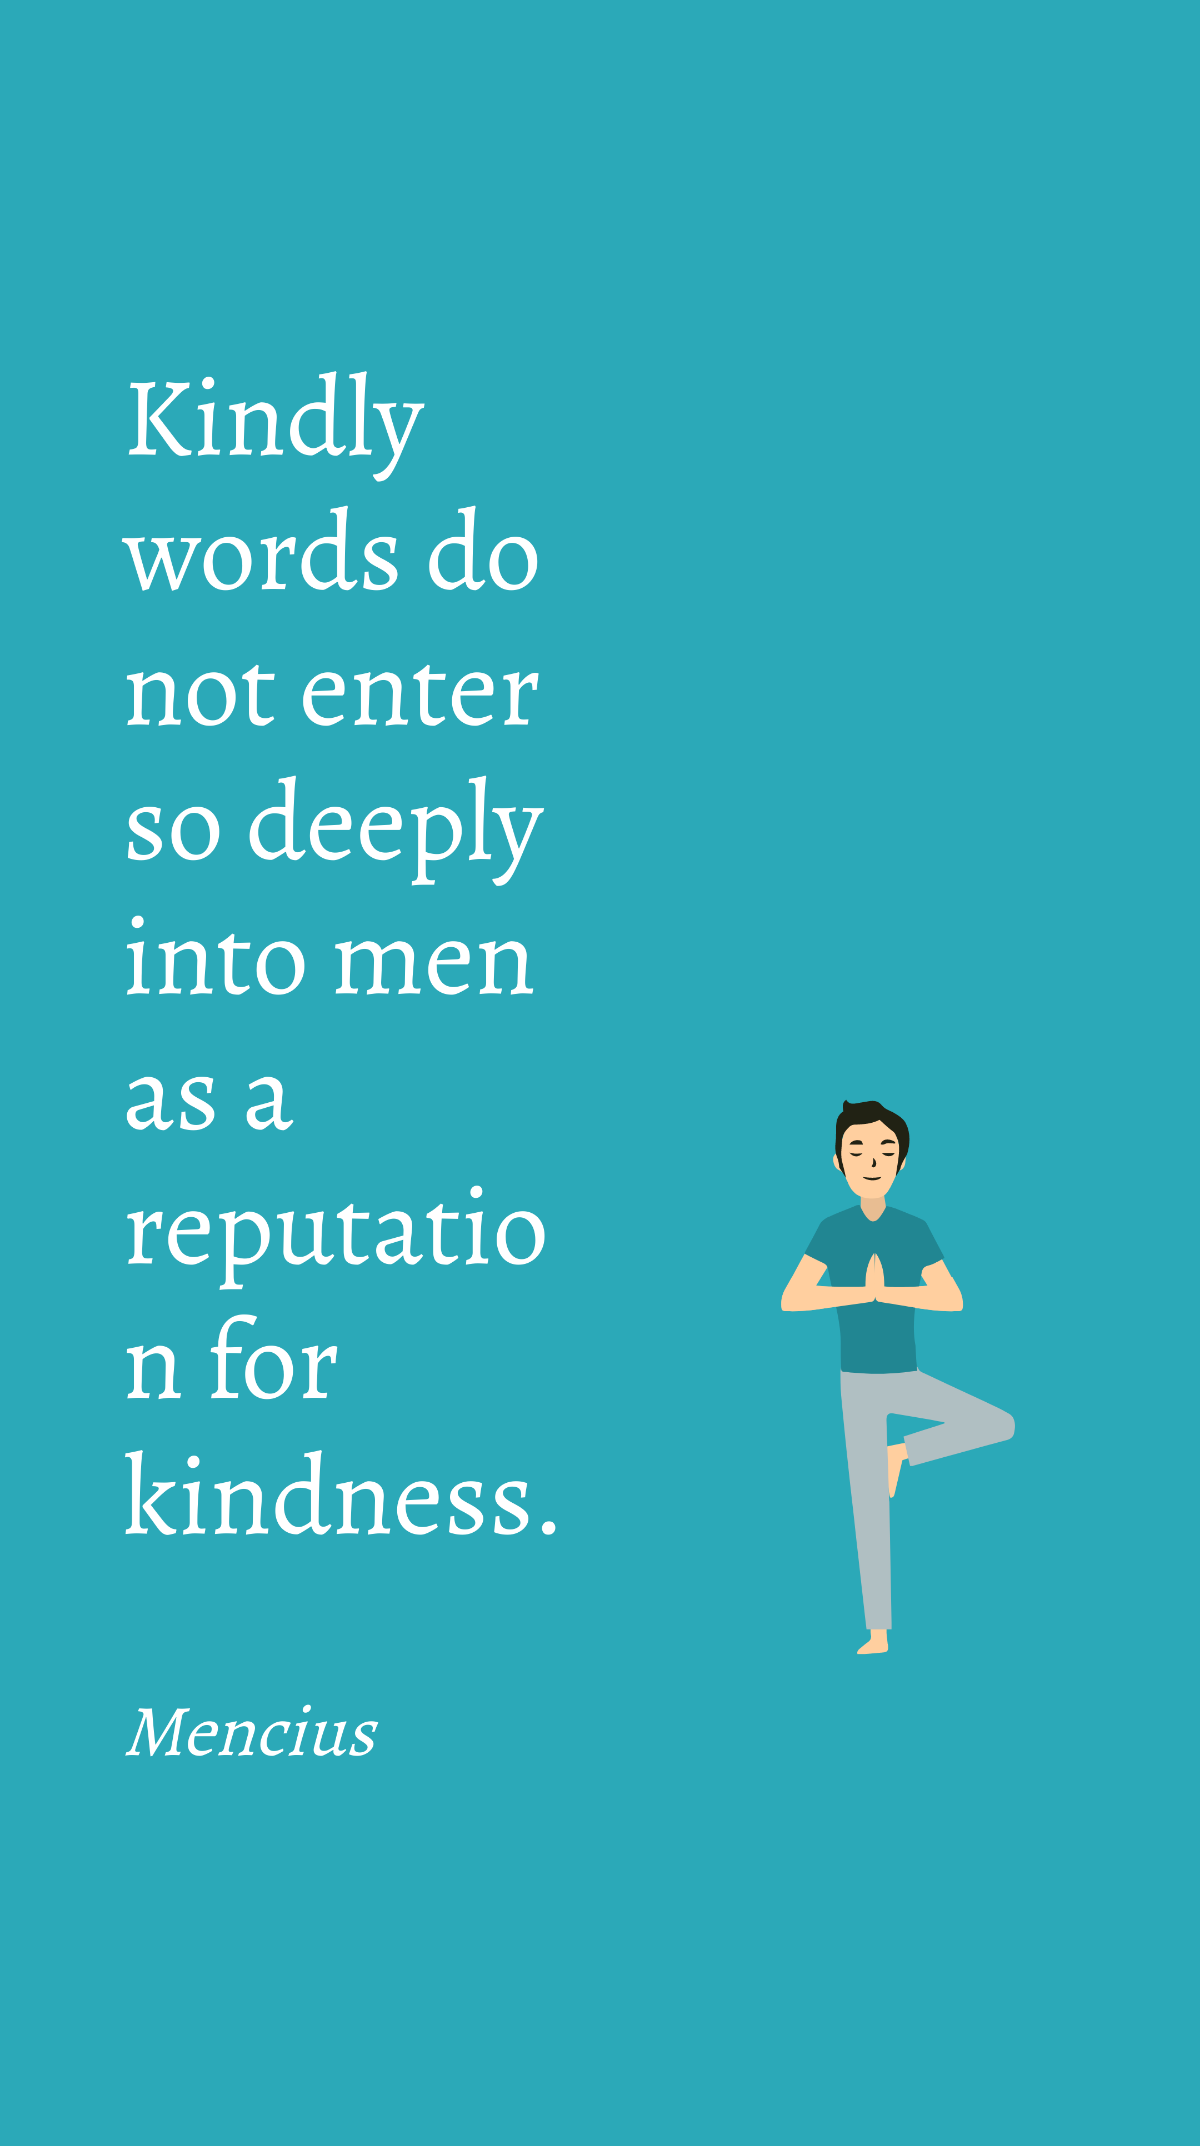 Mencius - Kindly words do not enter so deeply into men as a reputation for kindness.